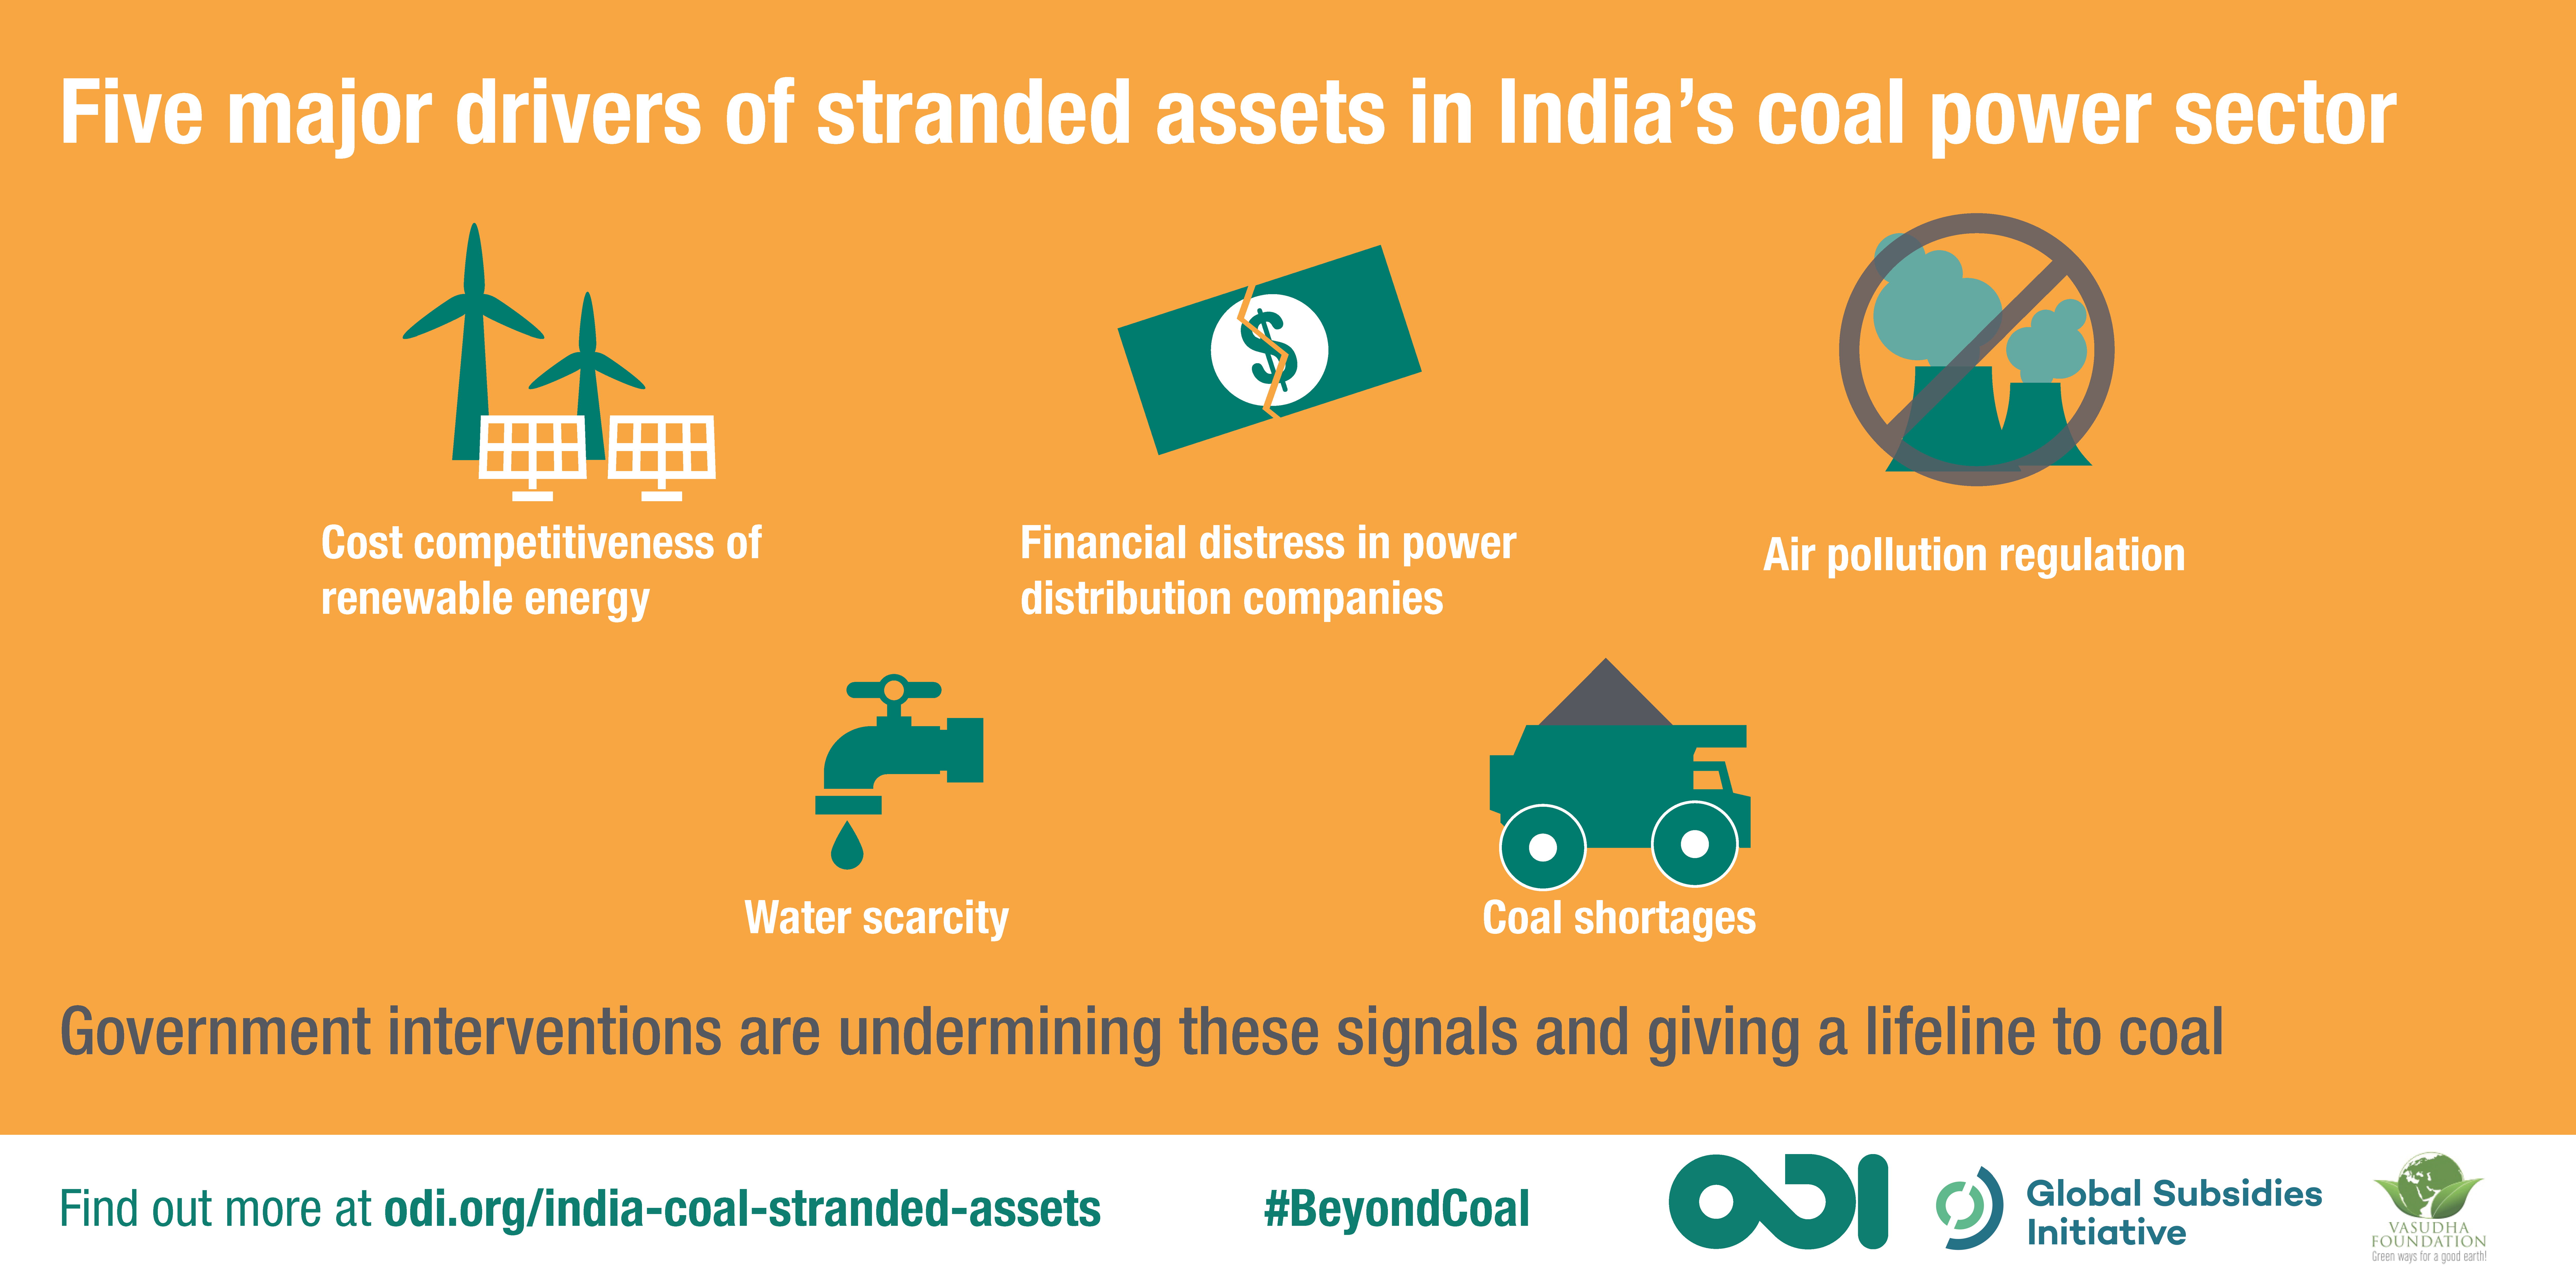 Five major drivers of stranded assets in India’s coal power sector. Graphic: Chris Little/ODI